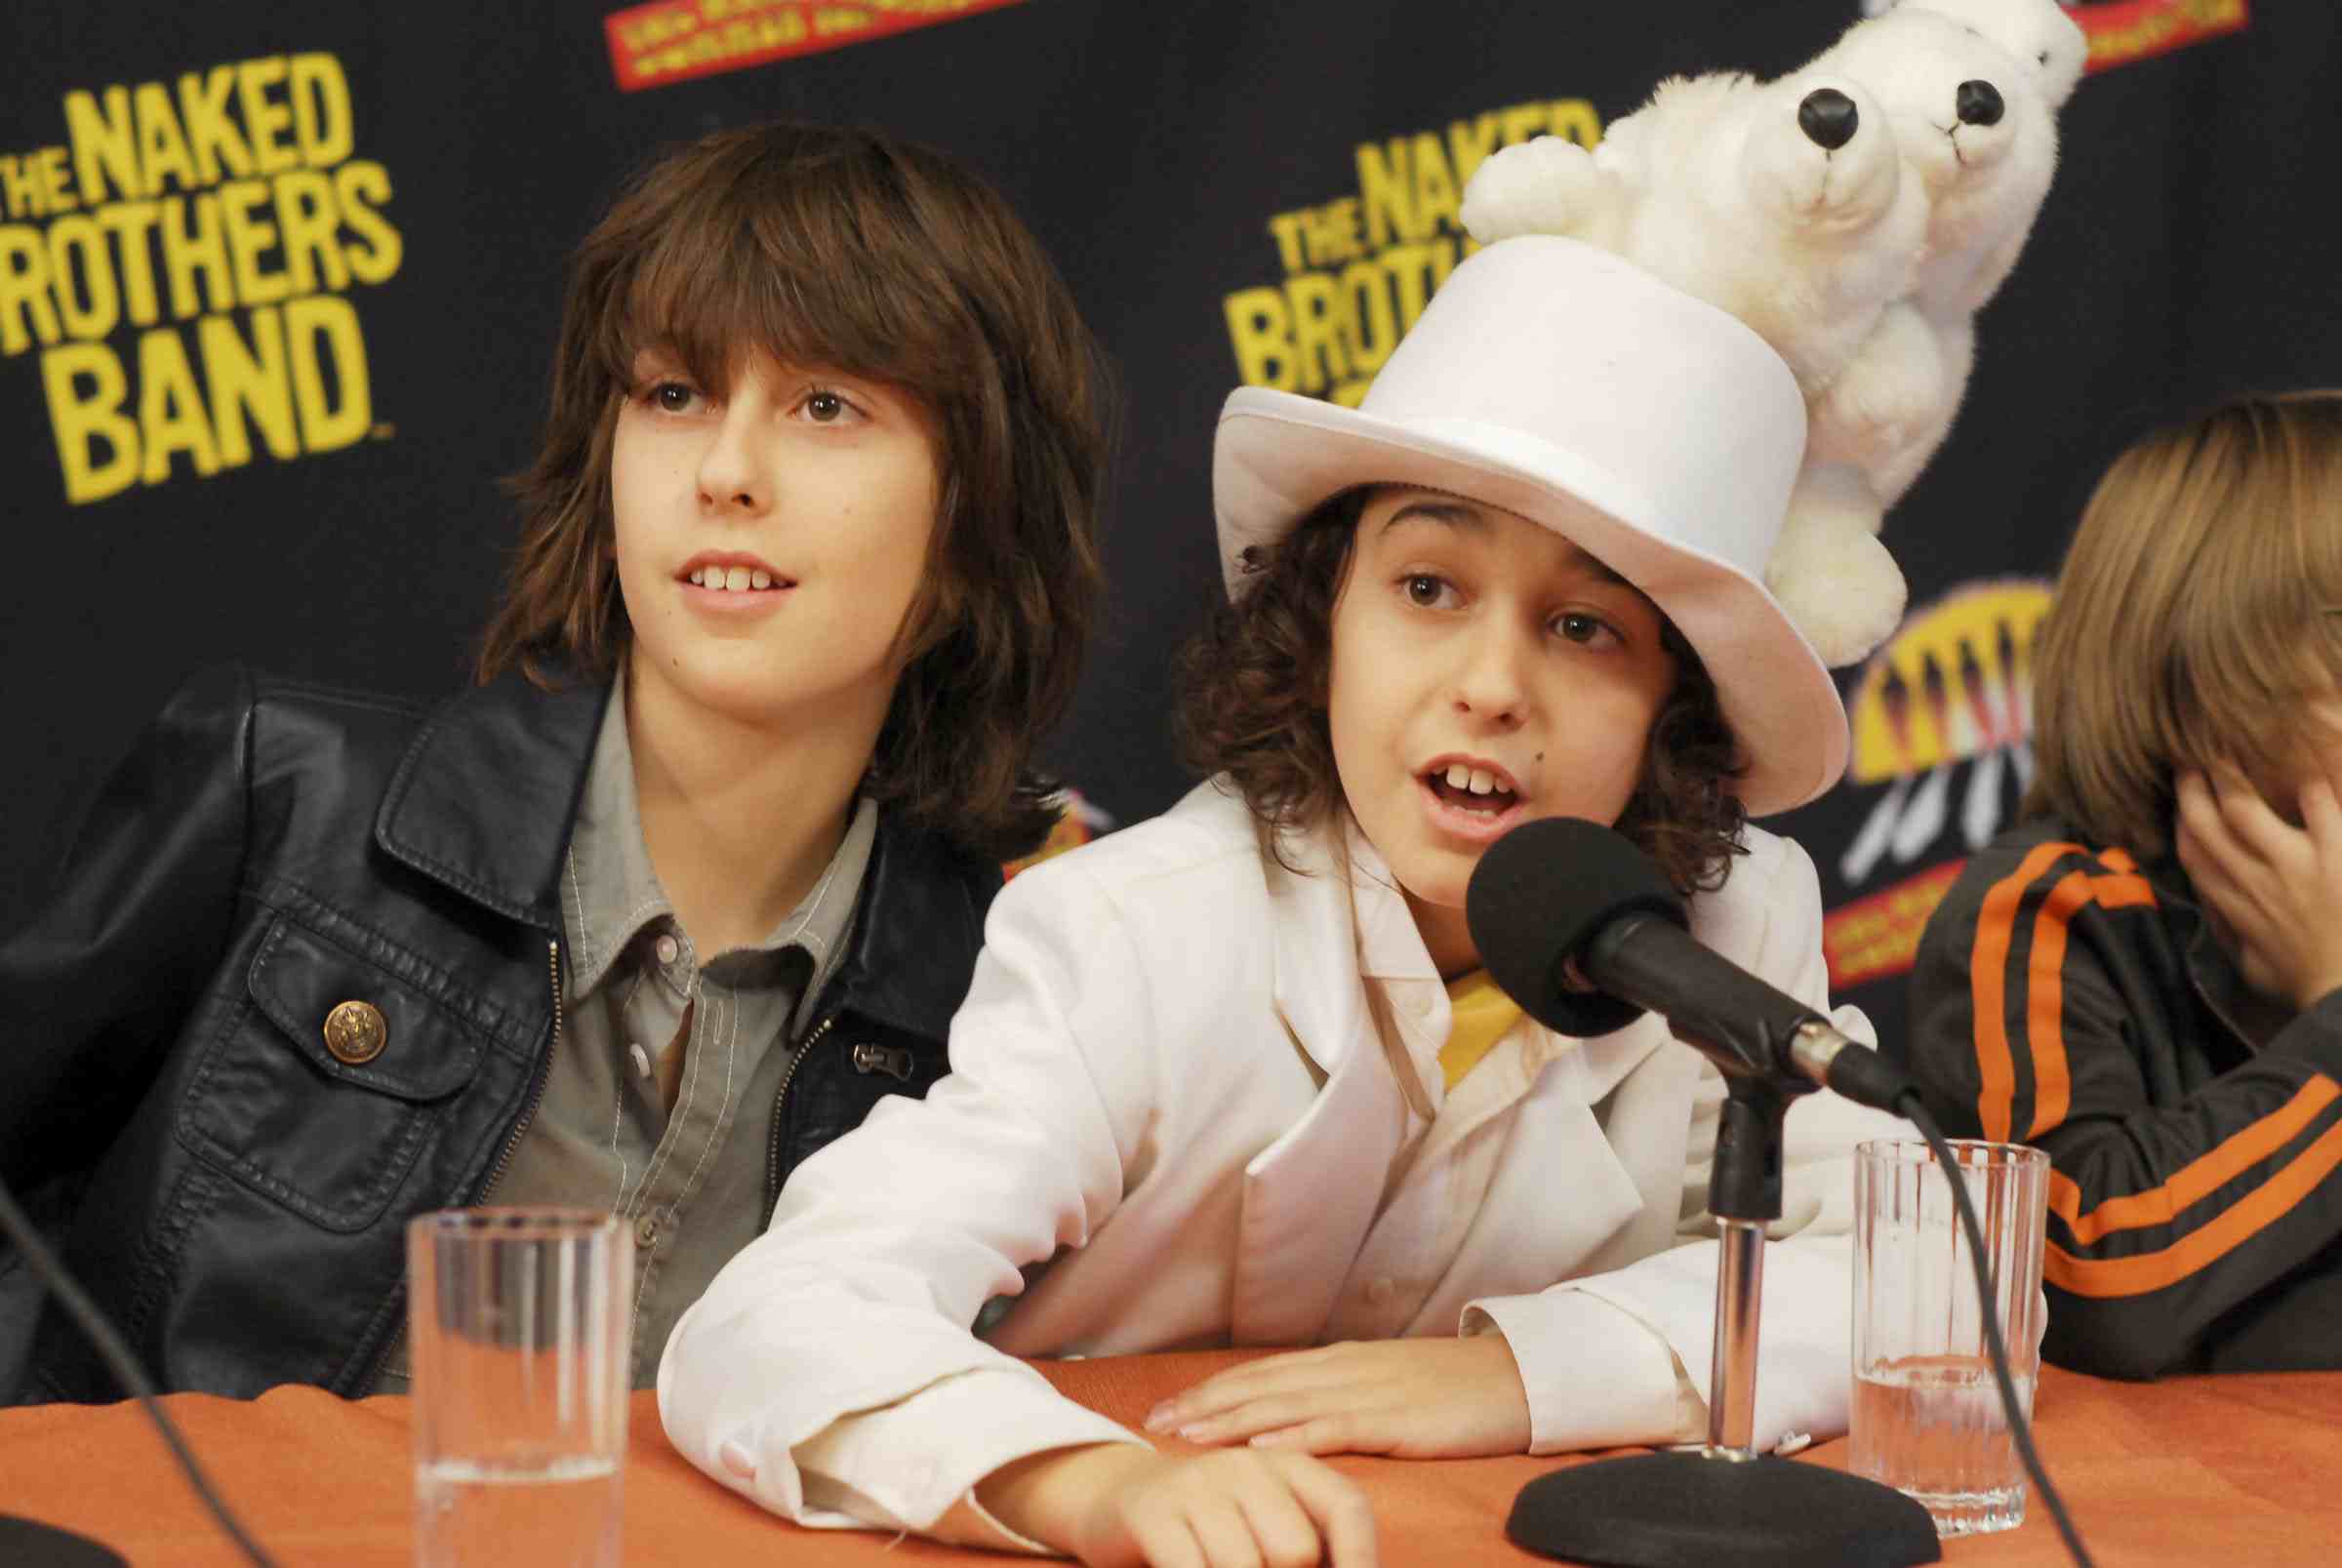 Cloudburst reccomend Buy the naked brothers band movie